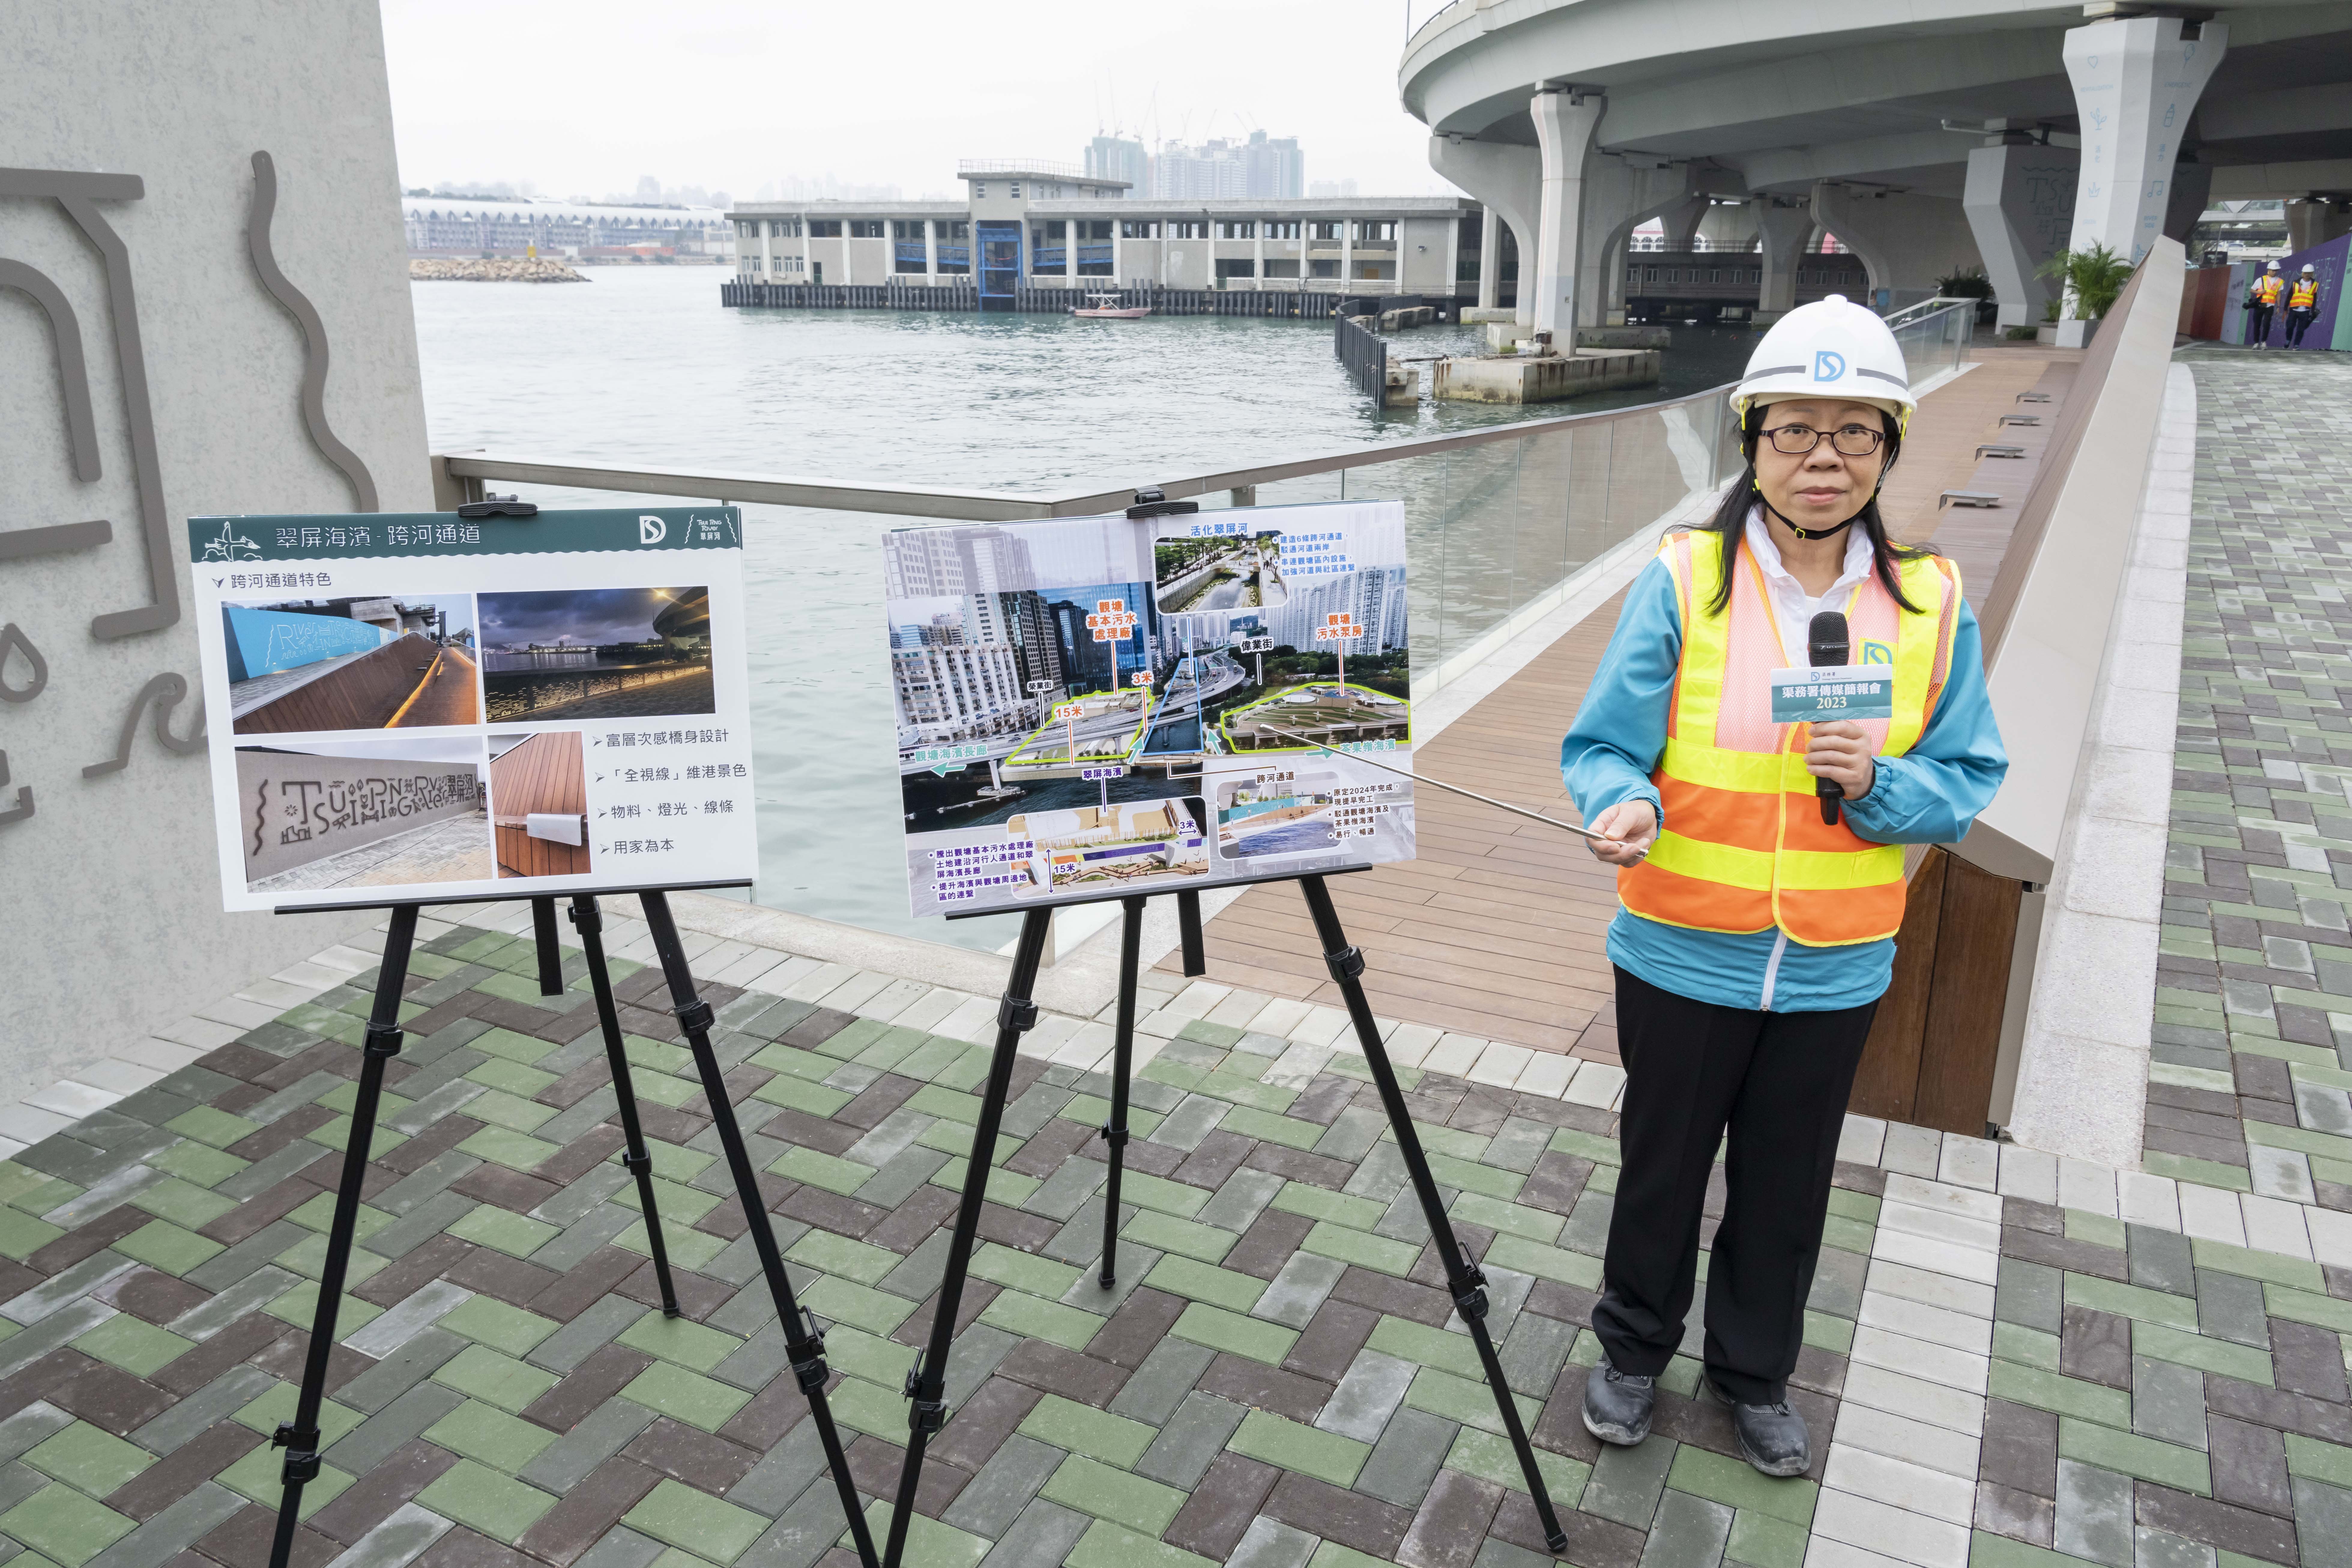 Ms PANG introduced the cross river walkway of Tsui Ping River behind. Citizens can access the Cha Kwo Ling Promenade from the Kwun Tong Promenade through this walkway in the future